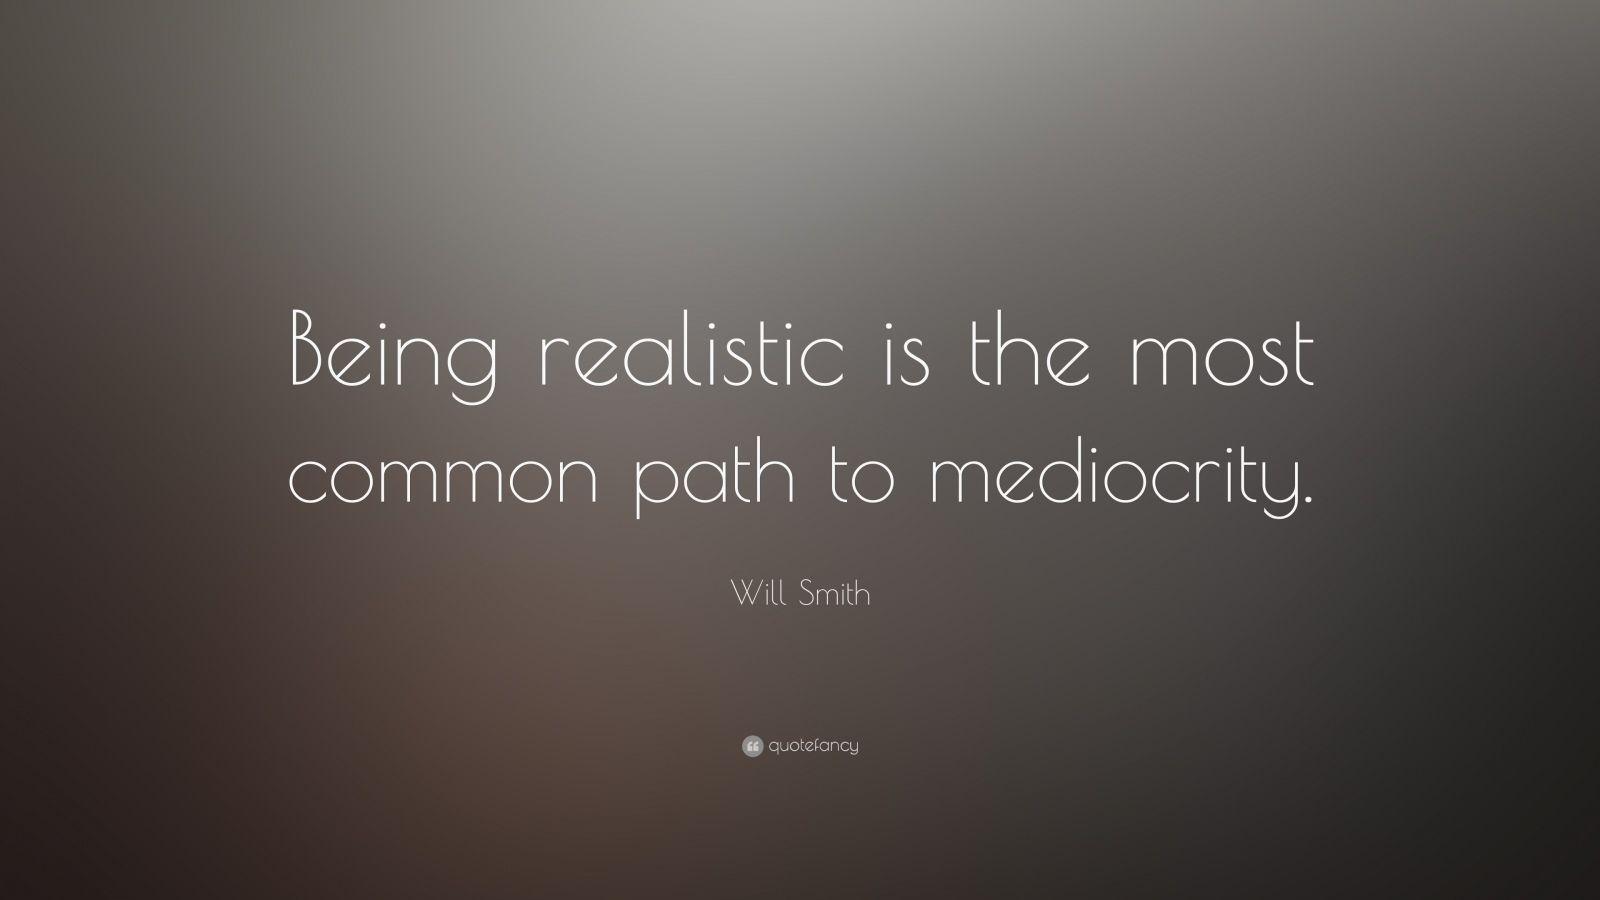 Inspirational Entrepreneurship Quotes: “Being realistic is